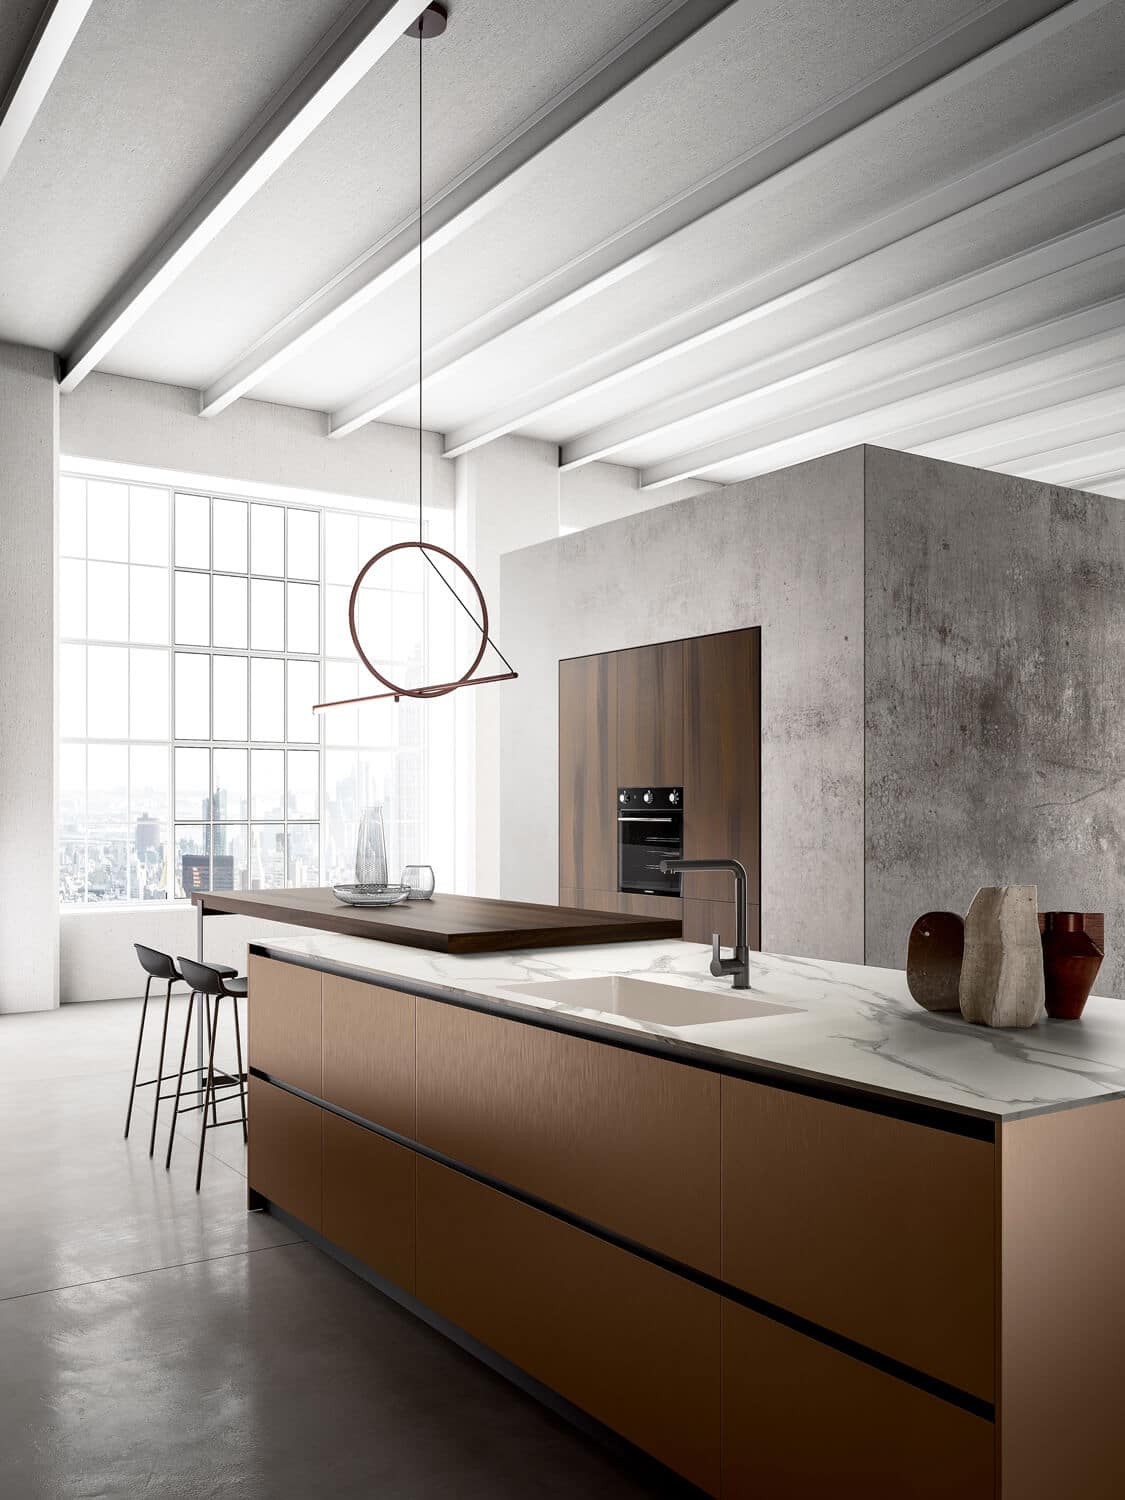 Modern kitchen designs with innovative and exclusive finishes